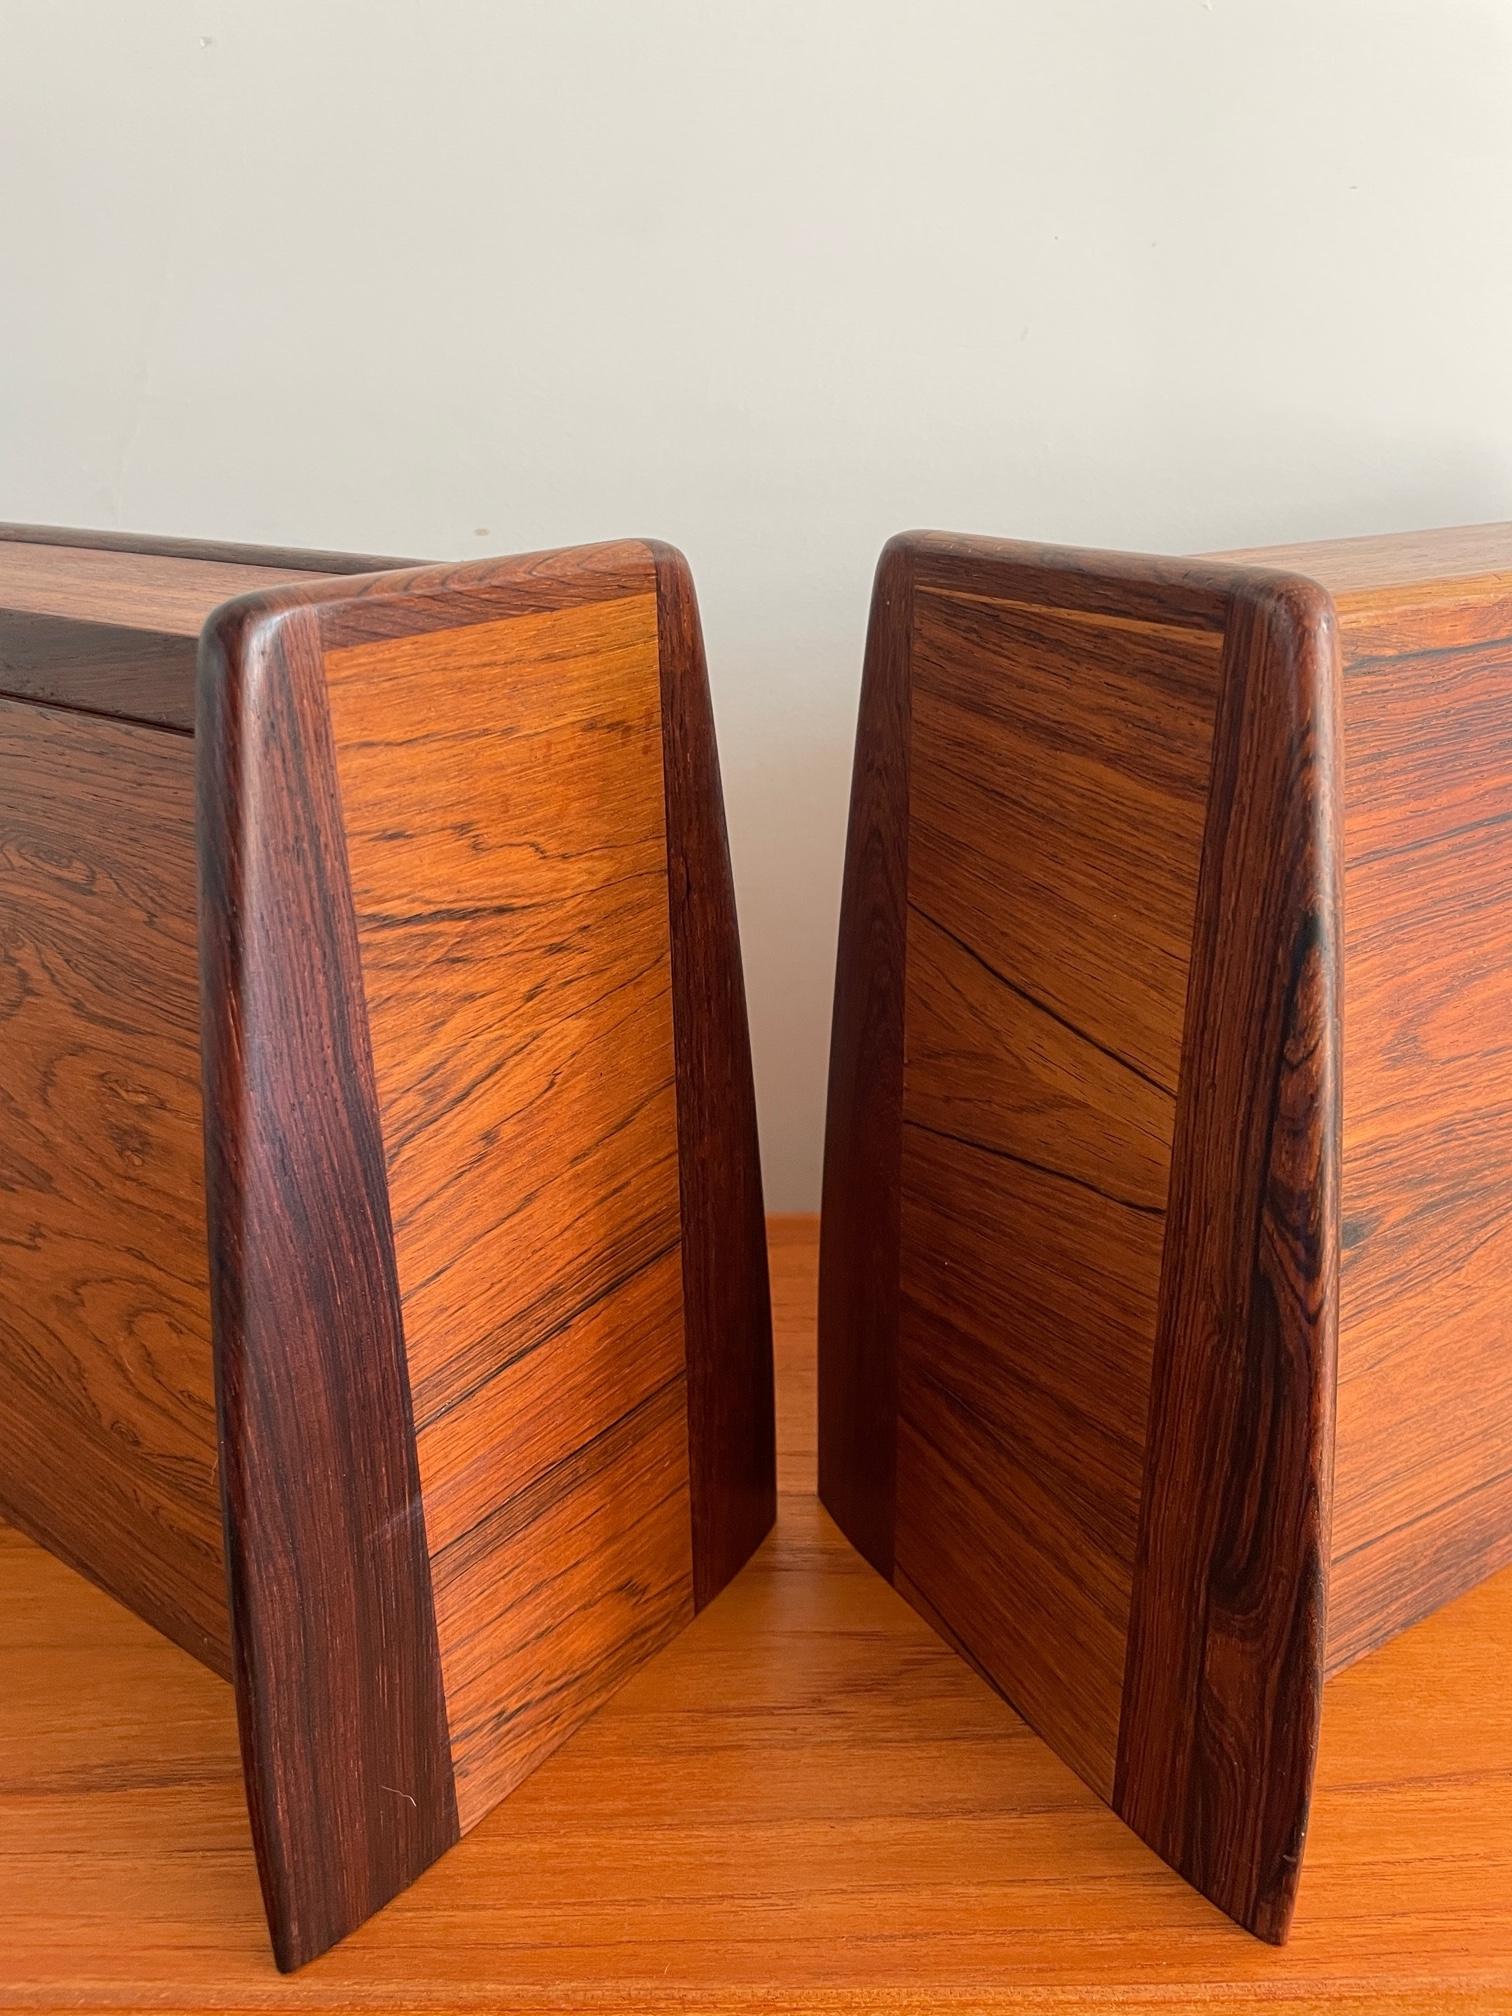 Rare pair of mid century Danish floating night stands by Melvin Mikkelsen, 1950s For Sale 8